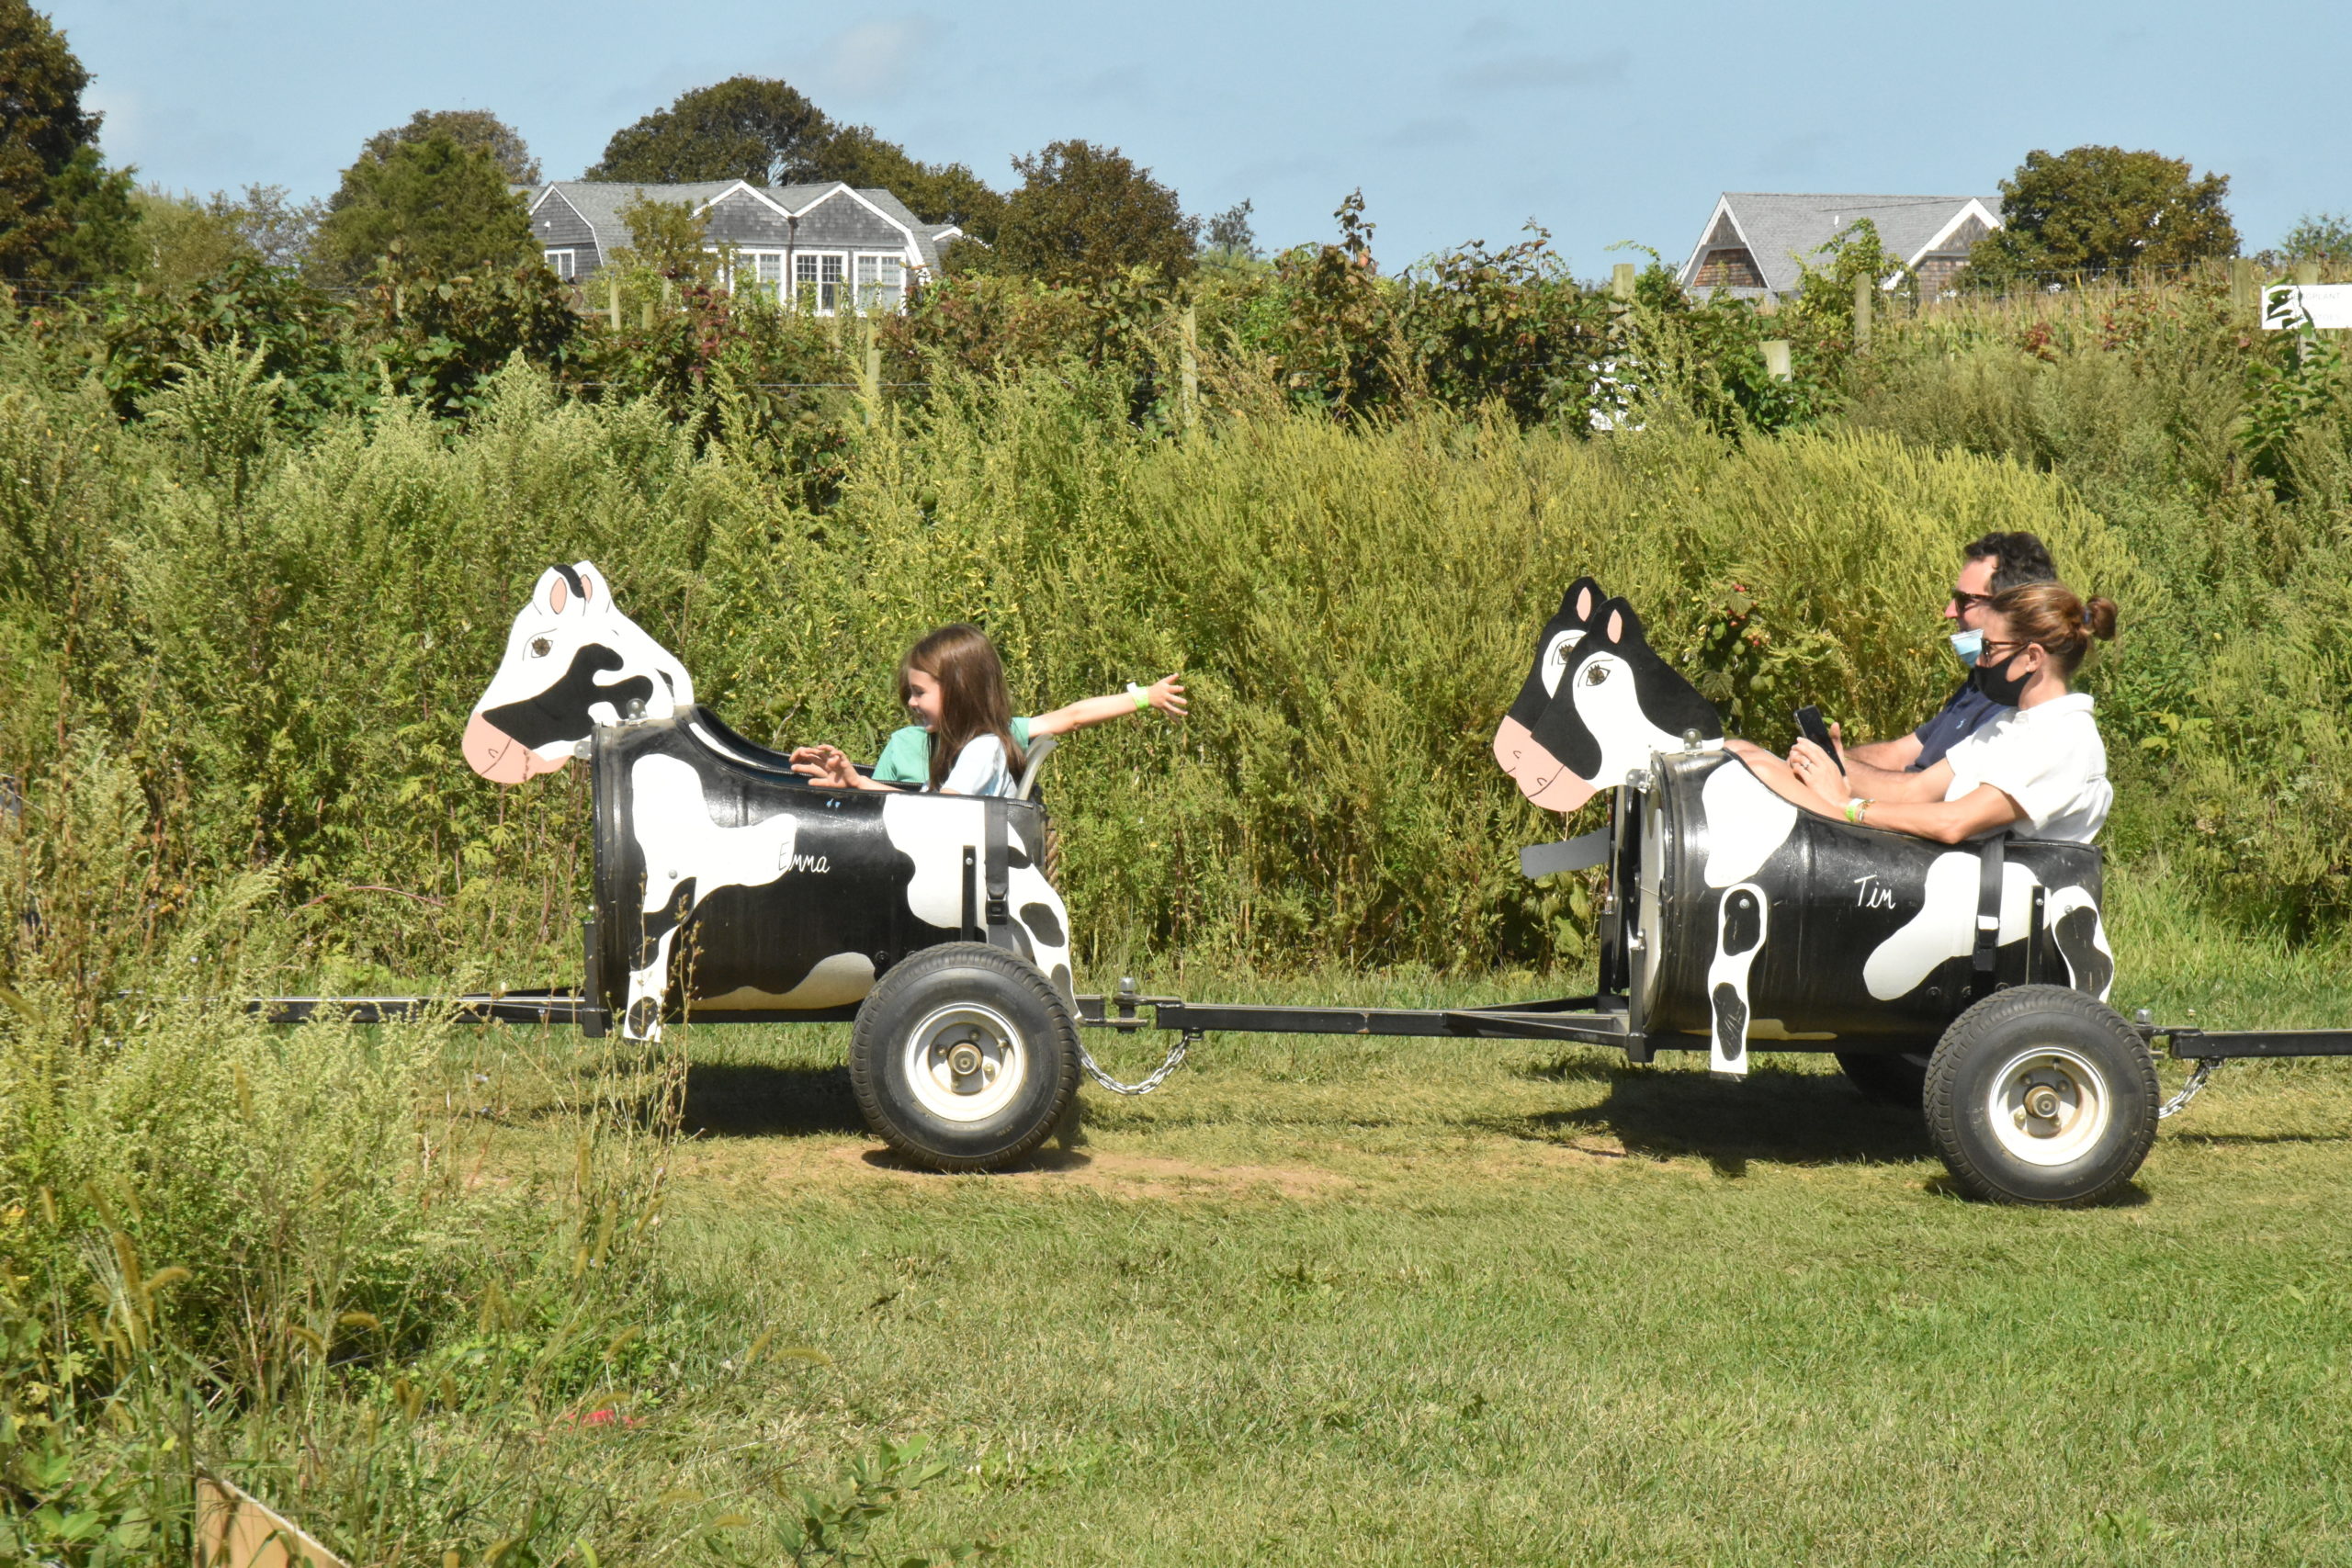 Riders on the cow train get a tour of Seven Ponds Orchard in Water Mill on Sunday. STEPHEN J. KOTZ